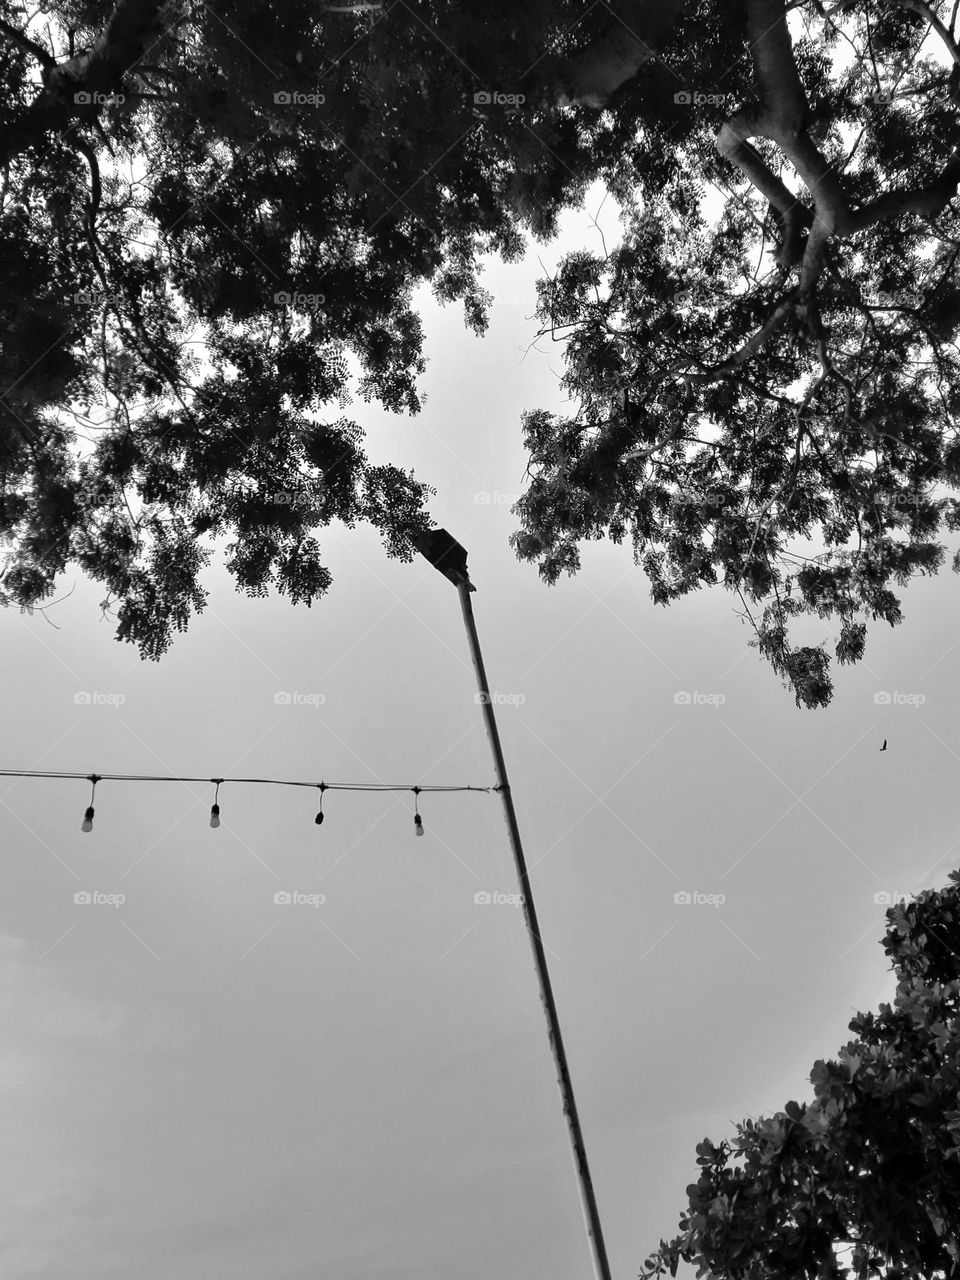 random photo of sky, pole, cable and leaf in a fine art style